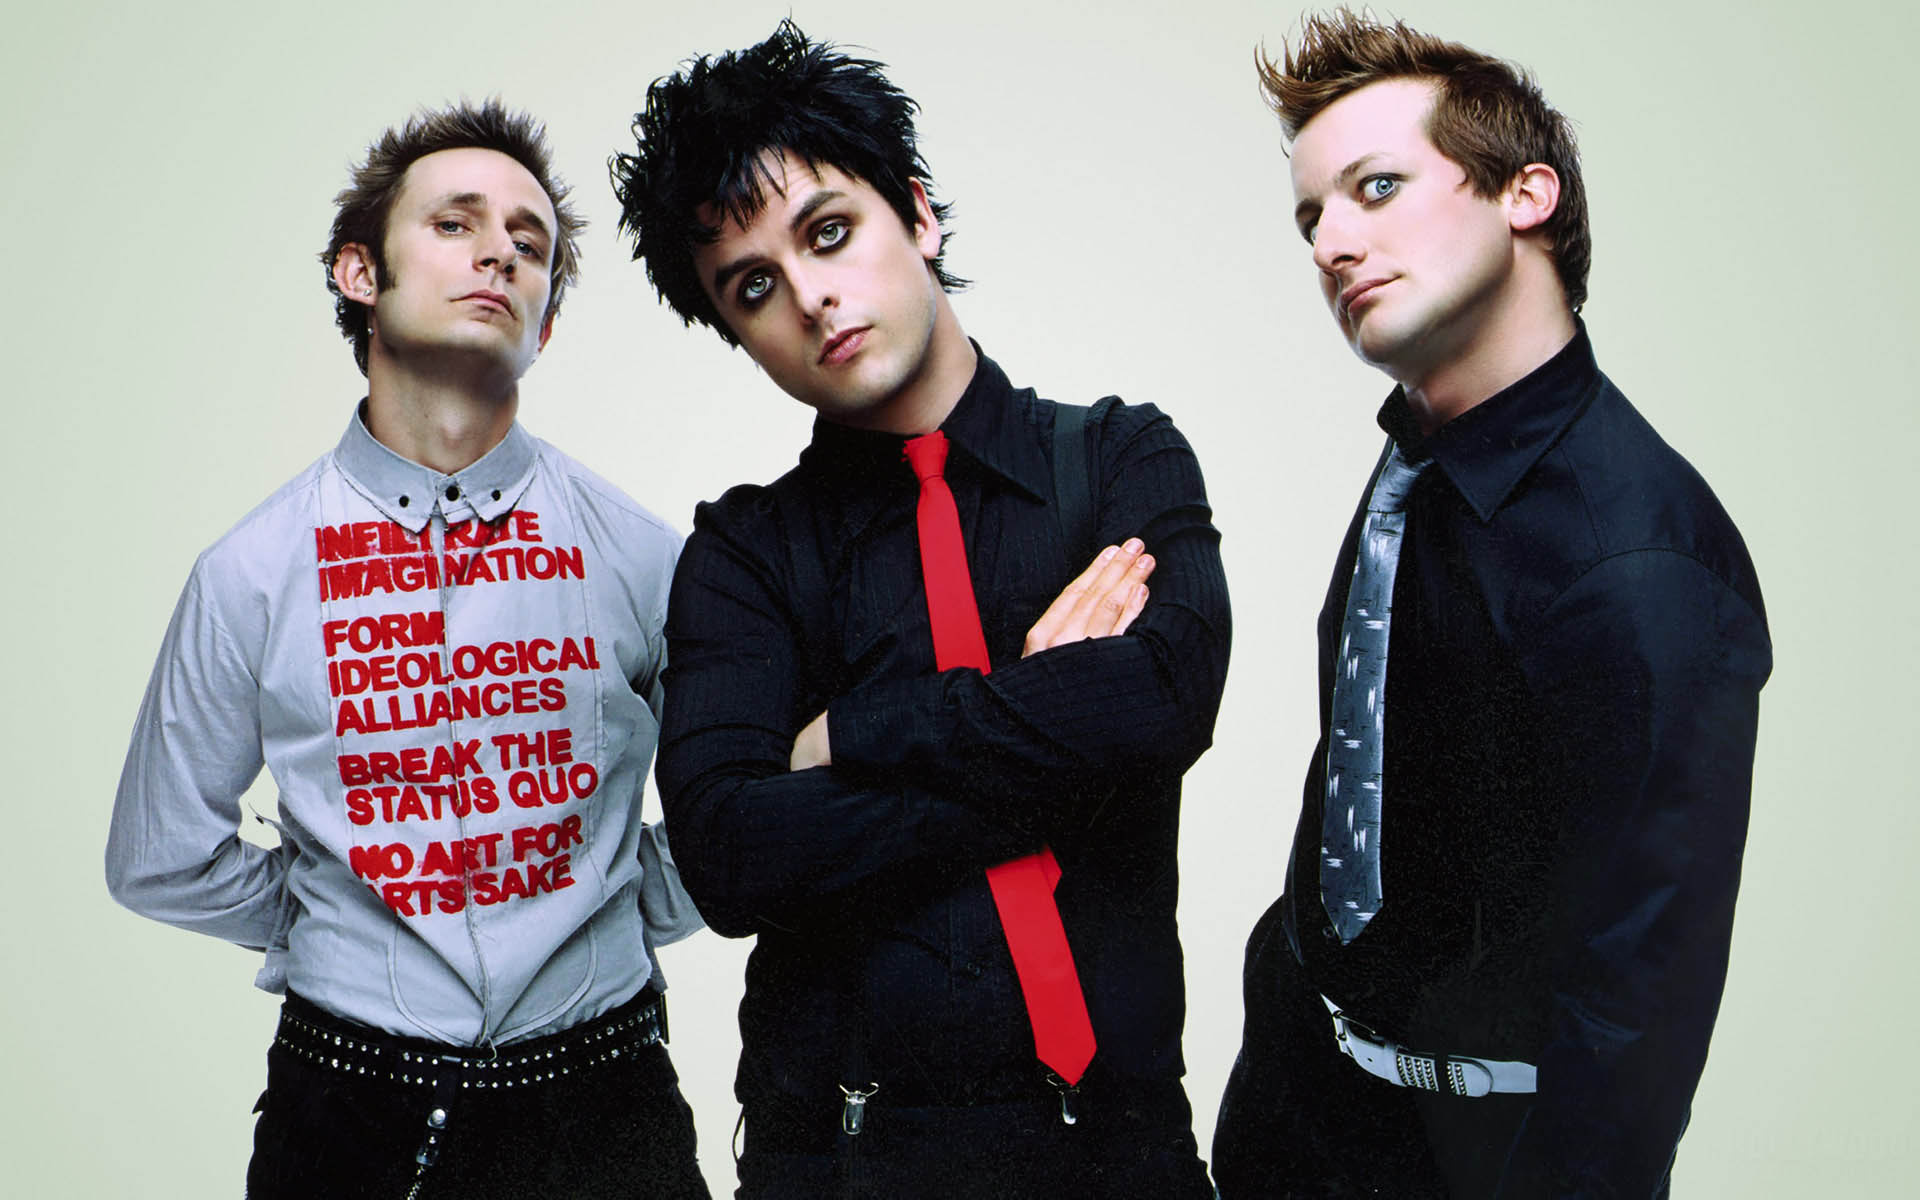 Green Day (Band): Best Alternative Album for Dookie, Best Rock Album for American Idiot and 21st Century Breakdown. 1920x1200 HD Wallpaper.